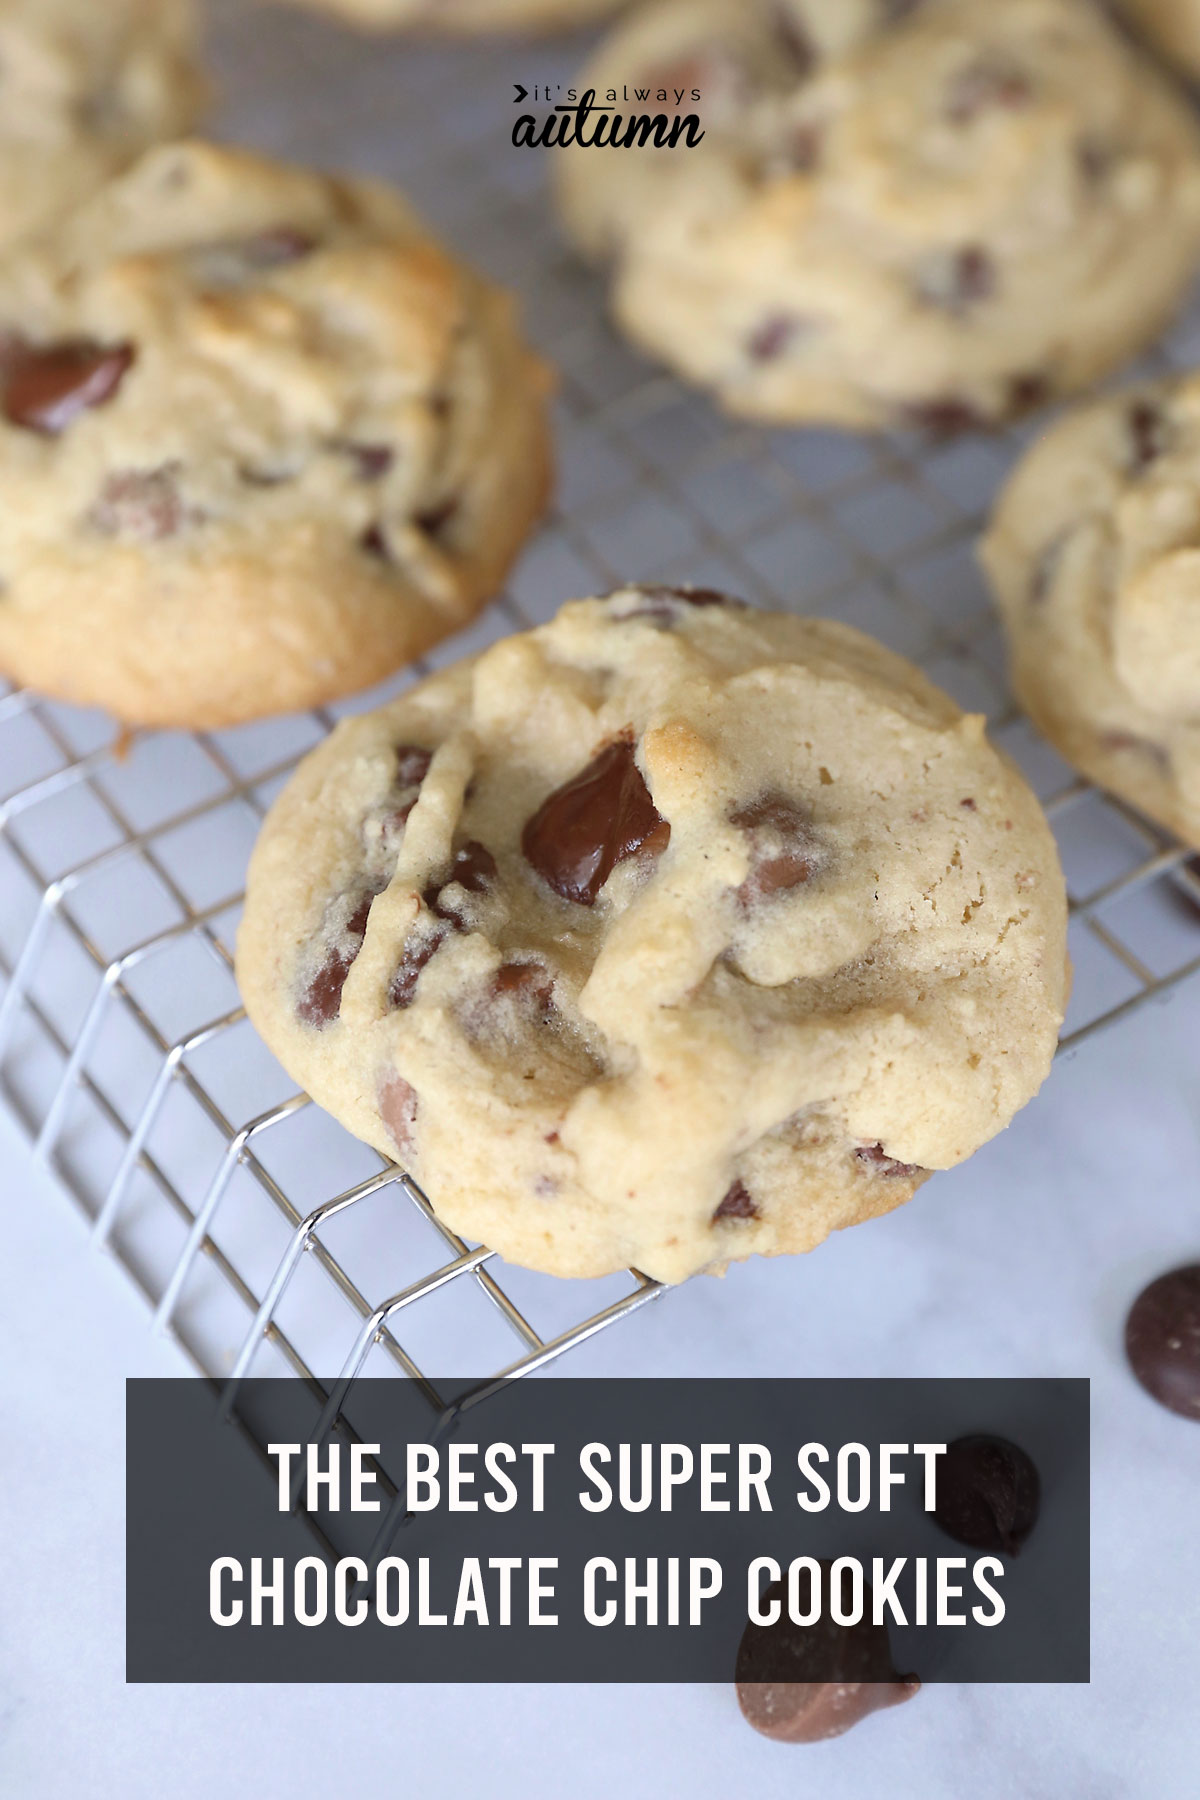 The BEST soft chocolate chip cookie recipe